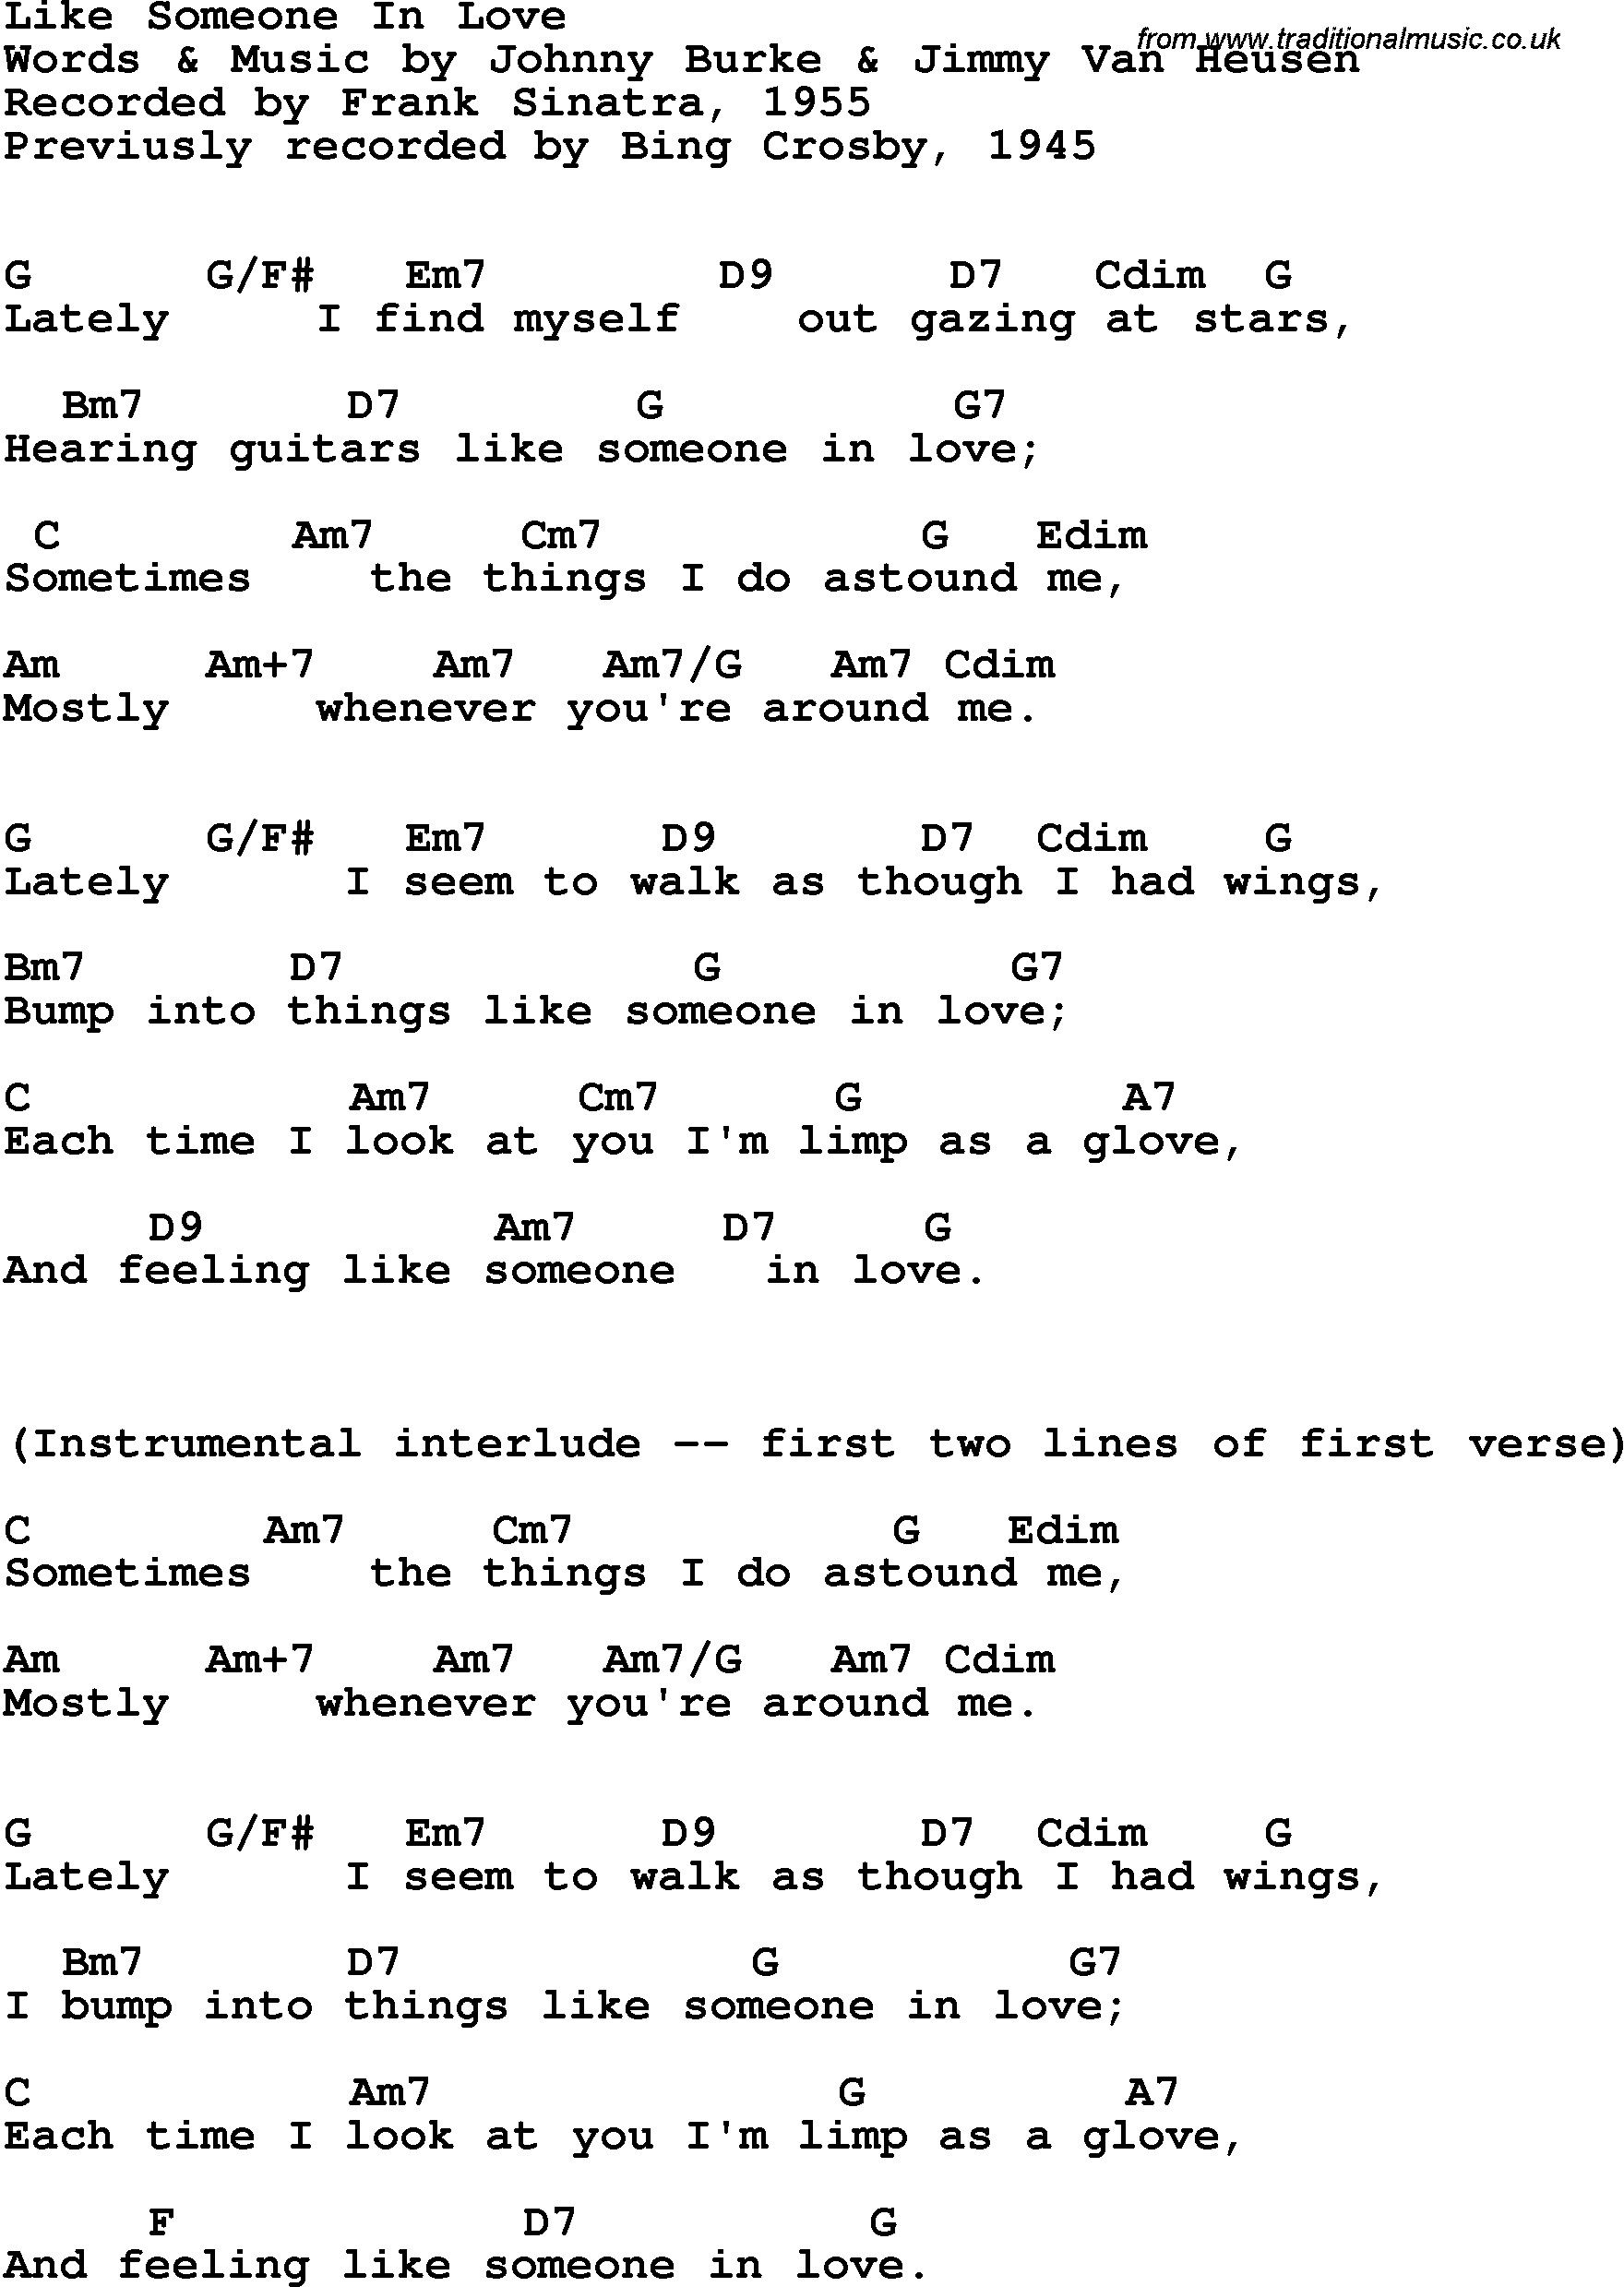 Song Lyrics with guitar chords for Like Someone In Love - Frank Sinatra, 1955